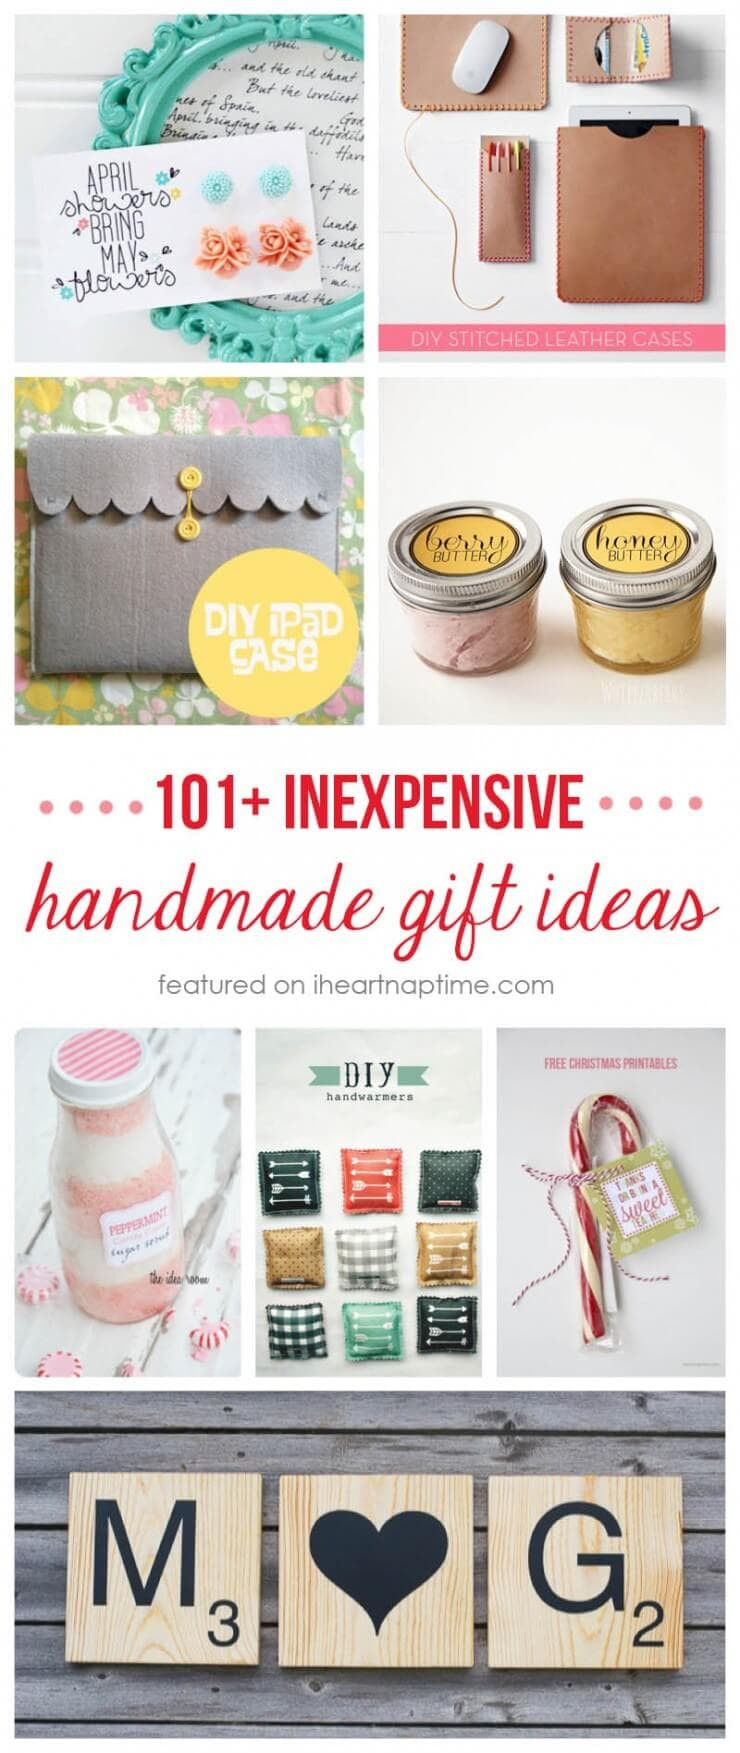 Homemade Christmas Gift Ideas
 50 homemade t ideas to make for under $5 I Heart Nap Time